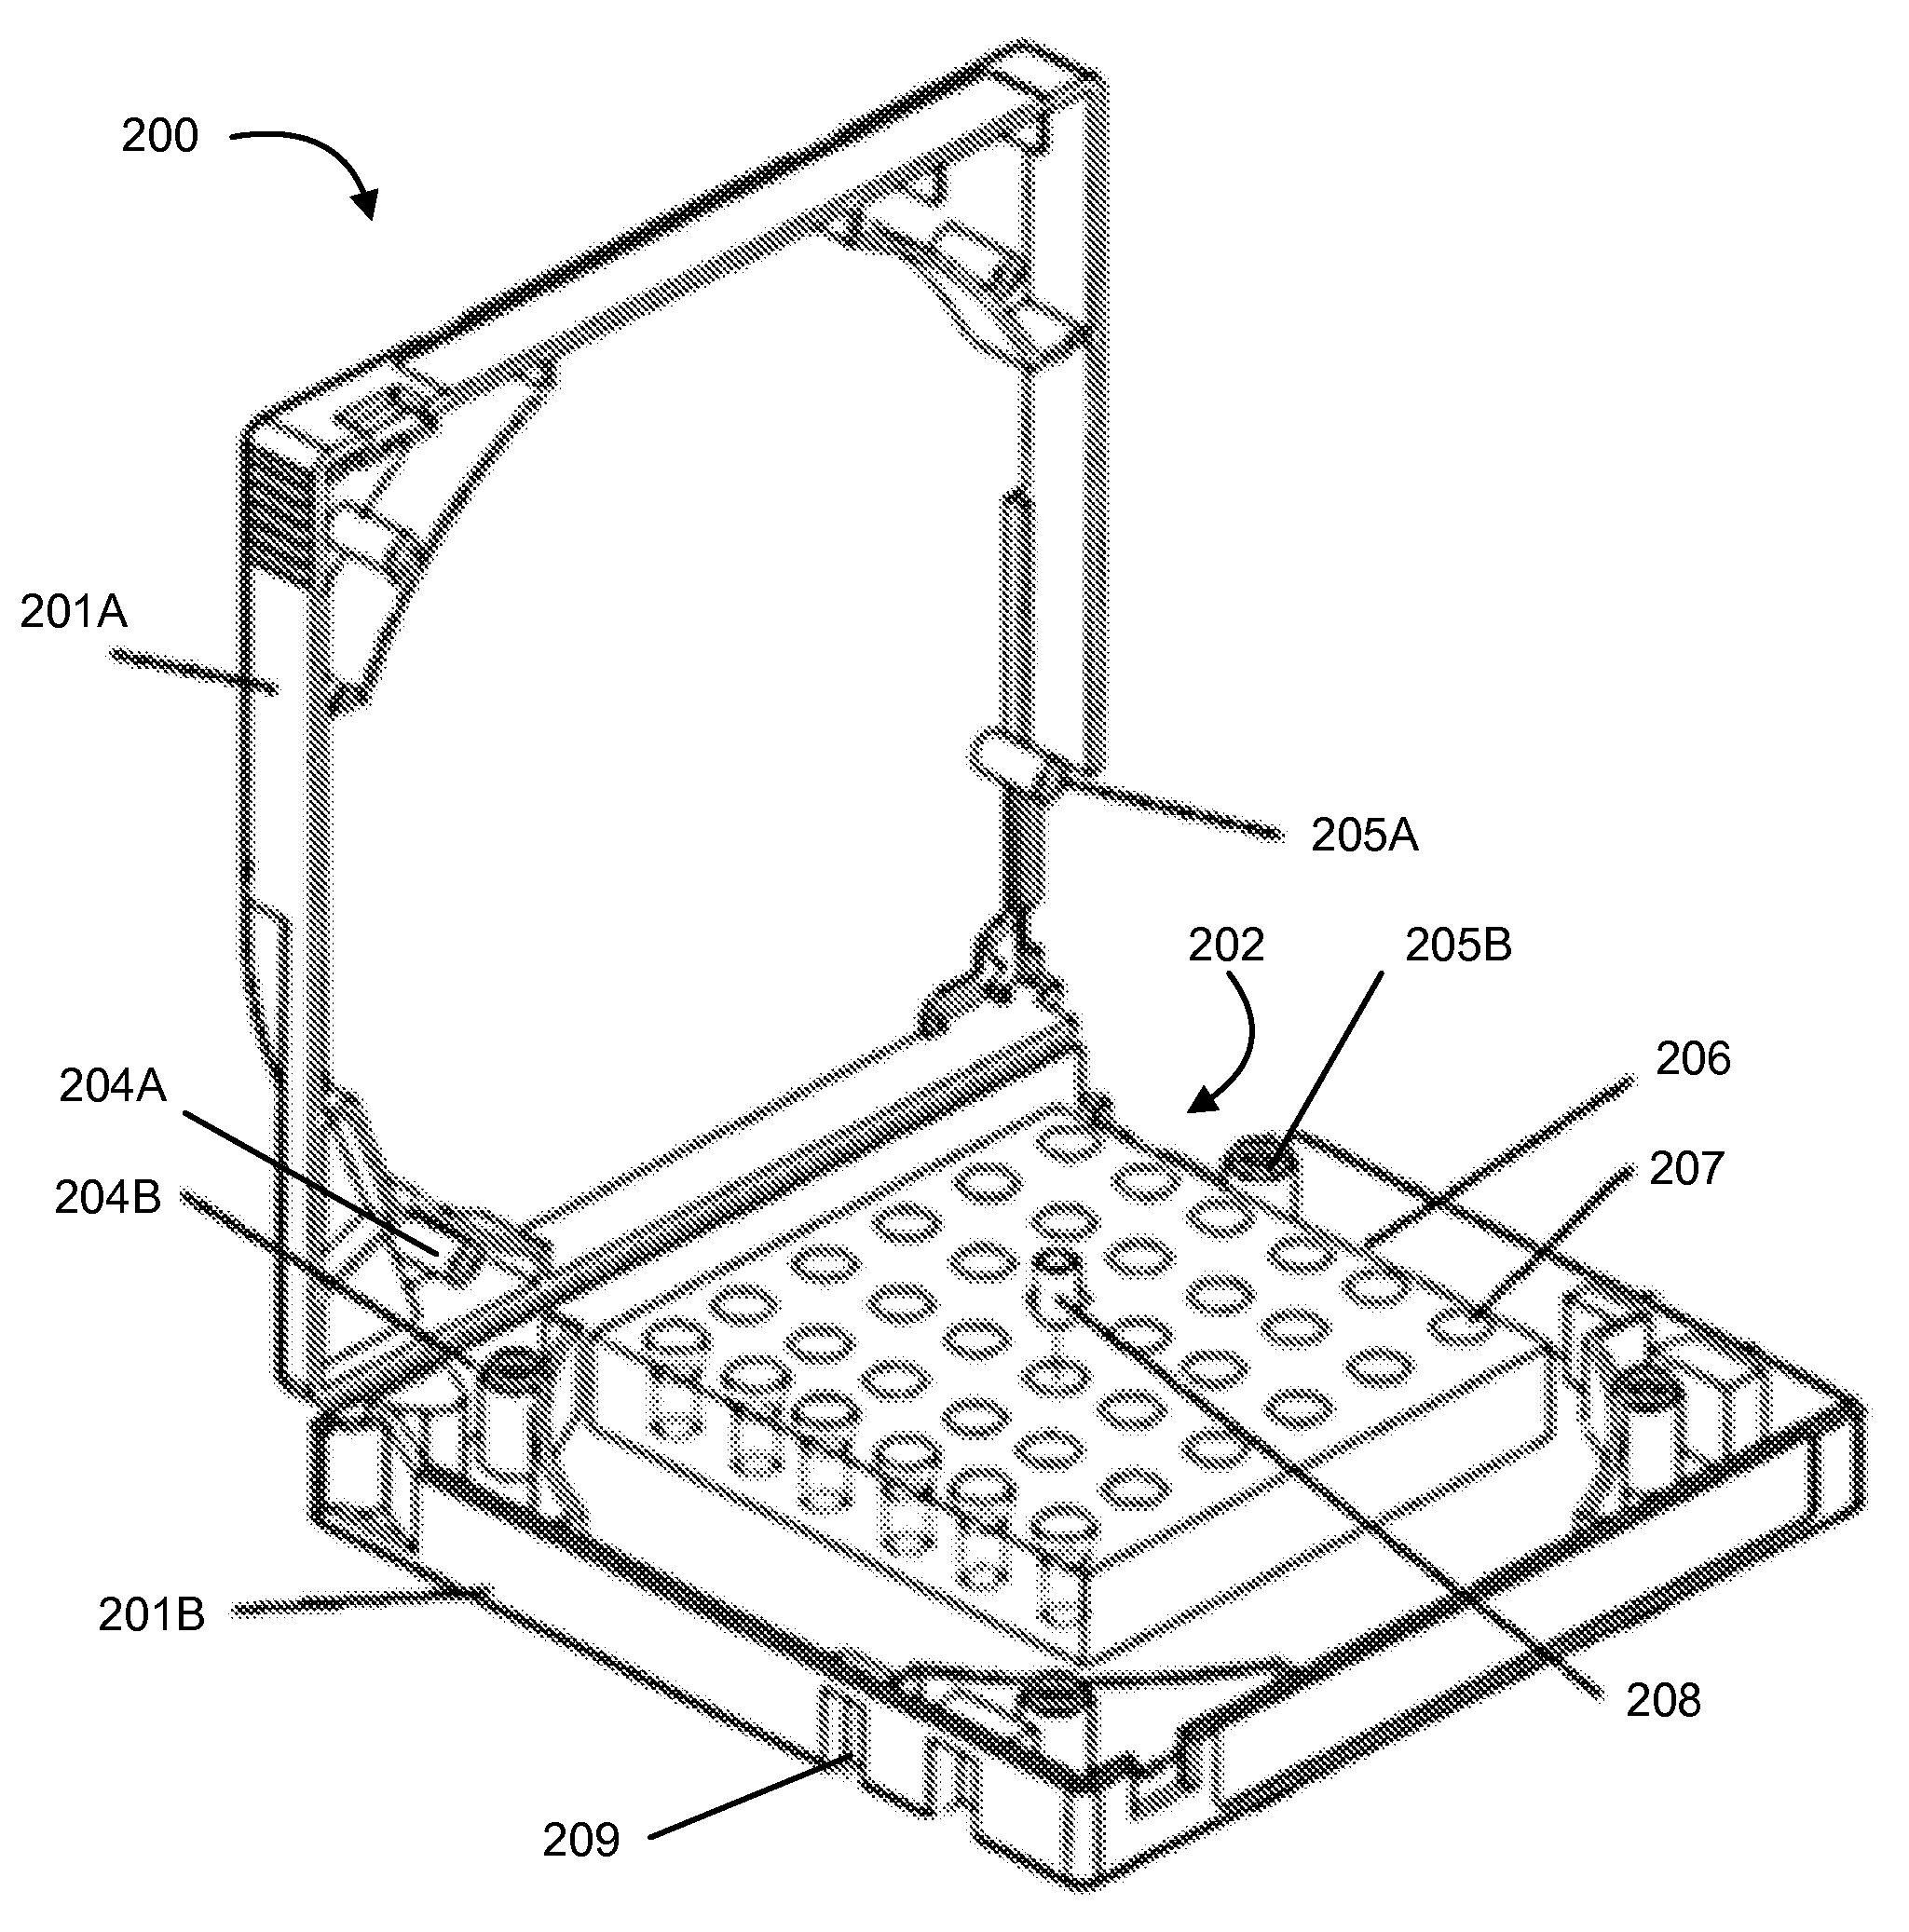 Cartridge for storing biosample capillary tubes and use in automated data storage systems